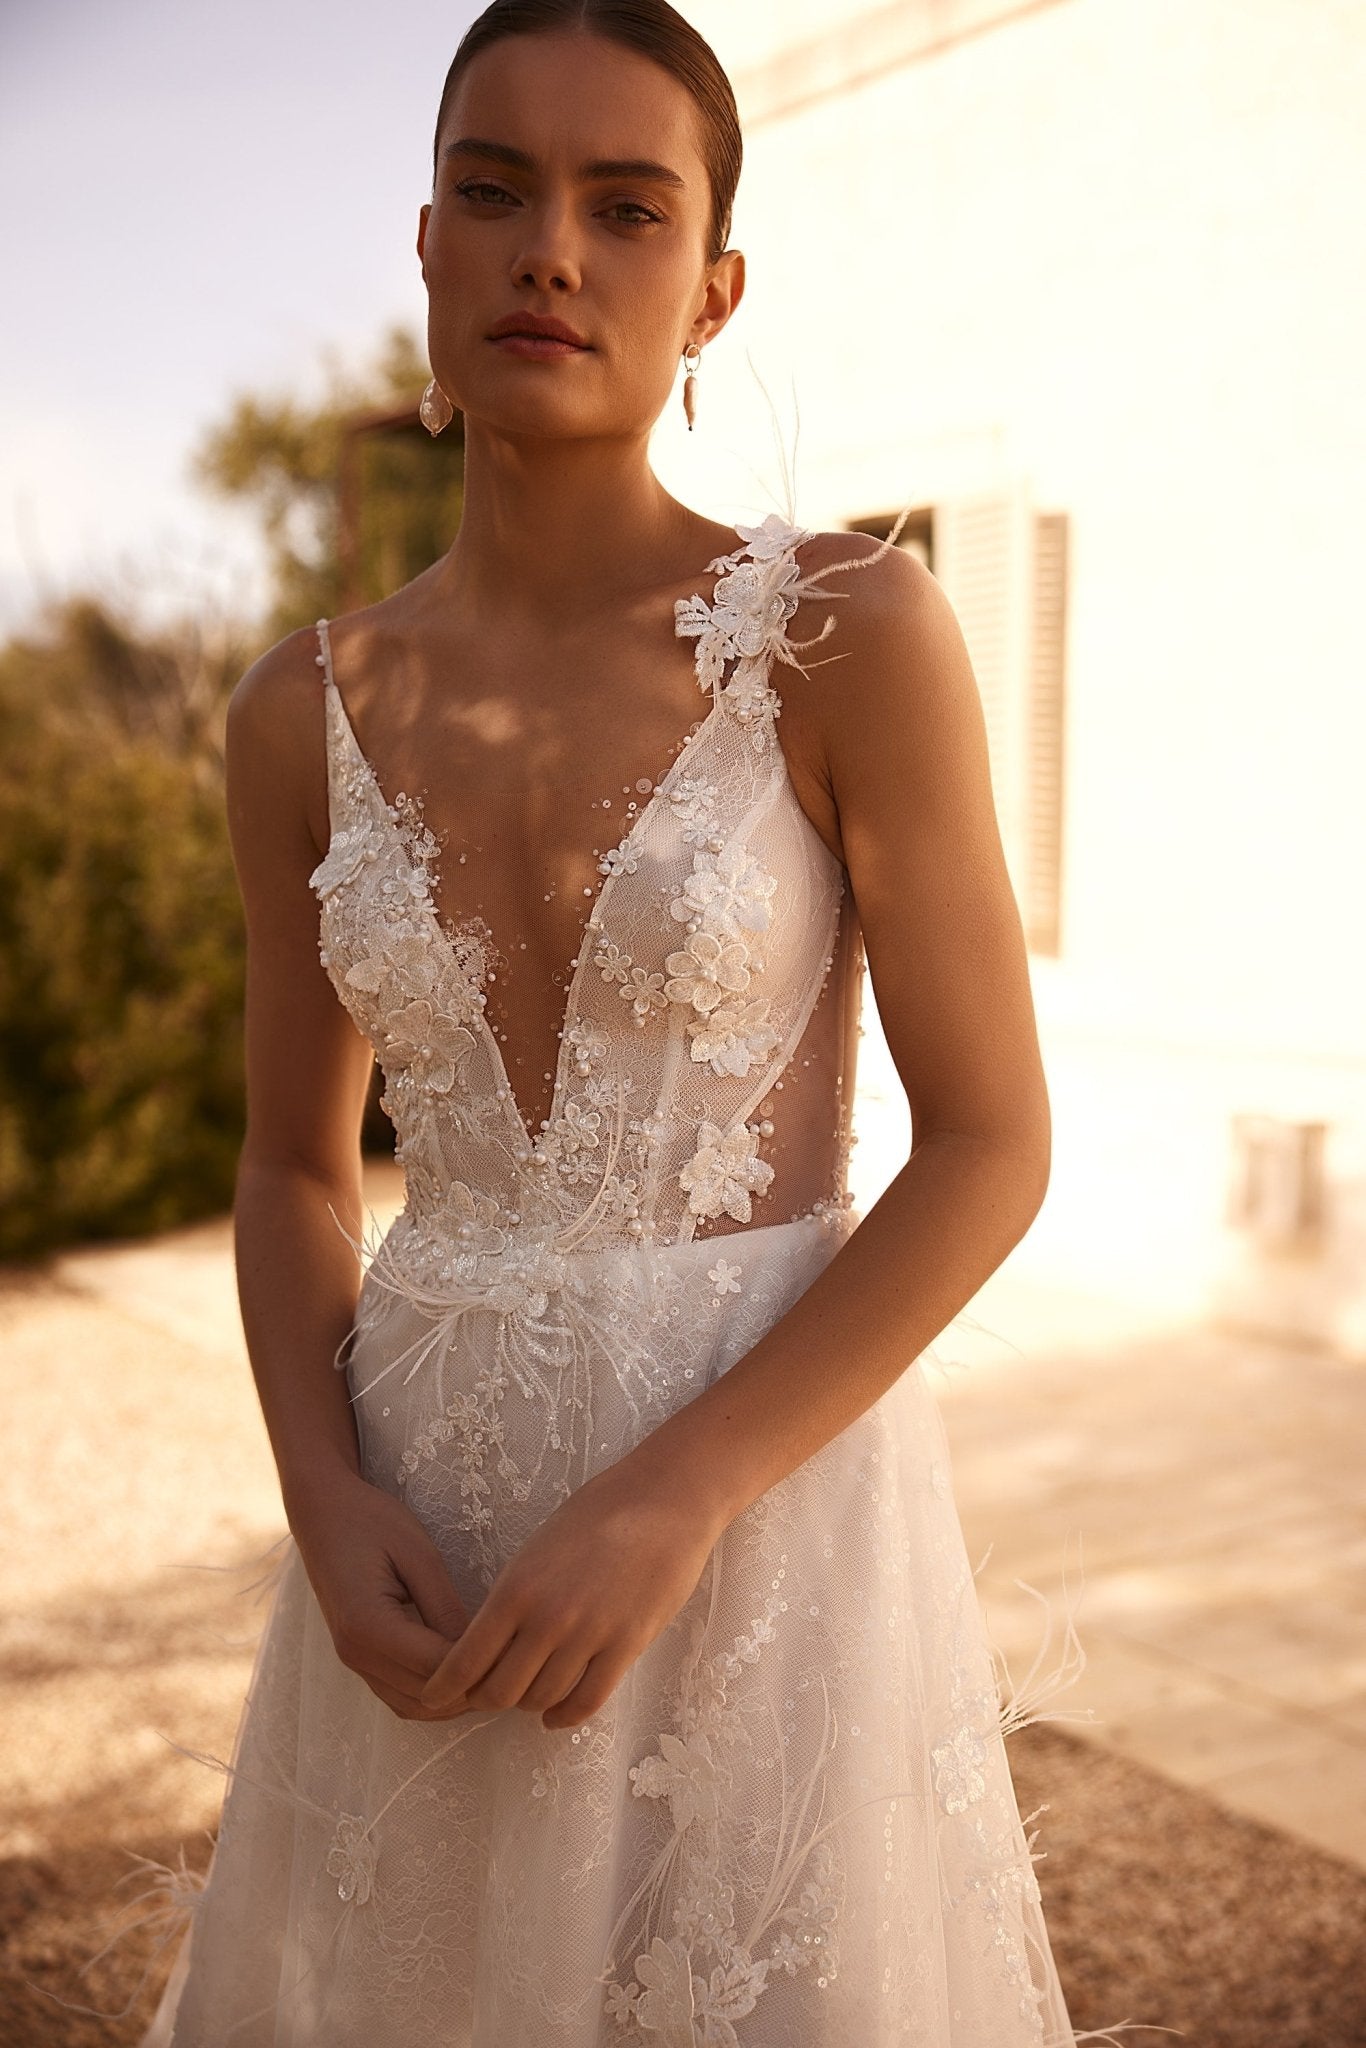 Floral Embellished Deep V-Neck Wedding Gown with Airy Tulle Train Plus Size - WonderlandByLilian